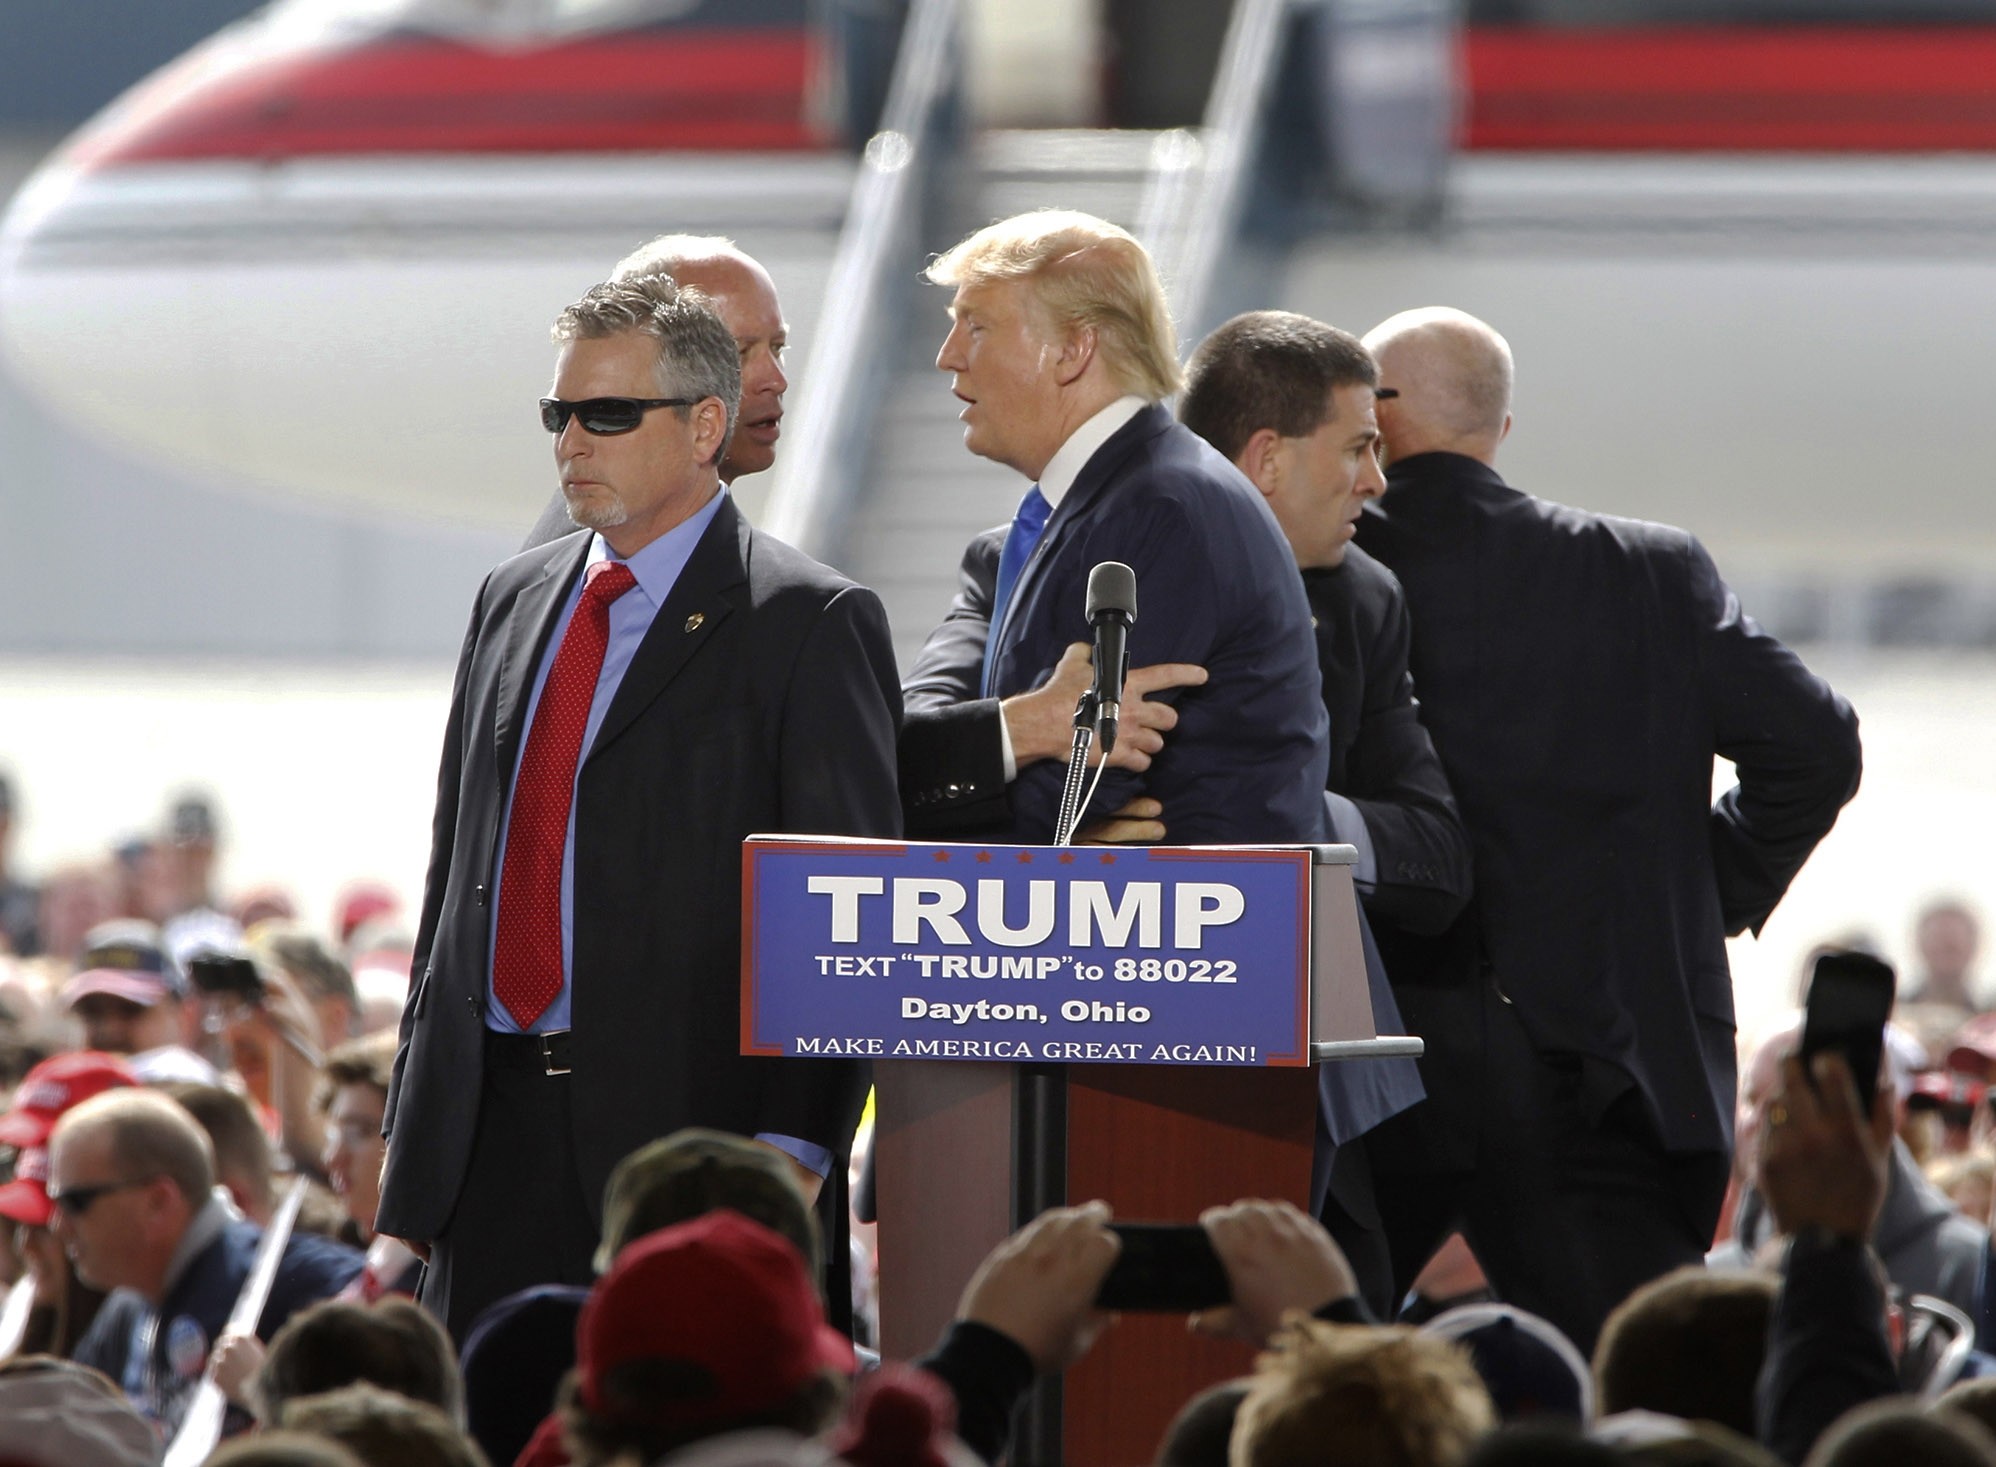  Security surround GOP presidential candidate Donald Trump after a man rushed the stage during a campaign rally at Dayton International Airport in Vandalia, Ohio. (AP Photo)